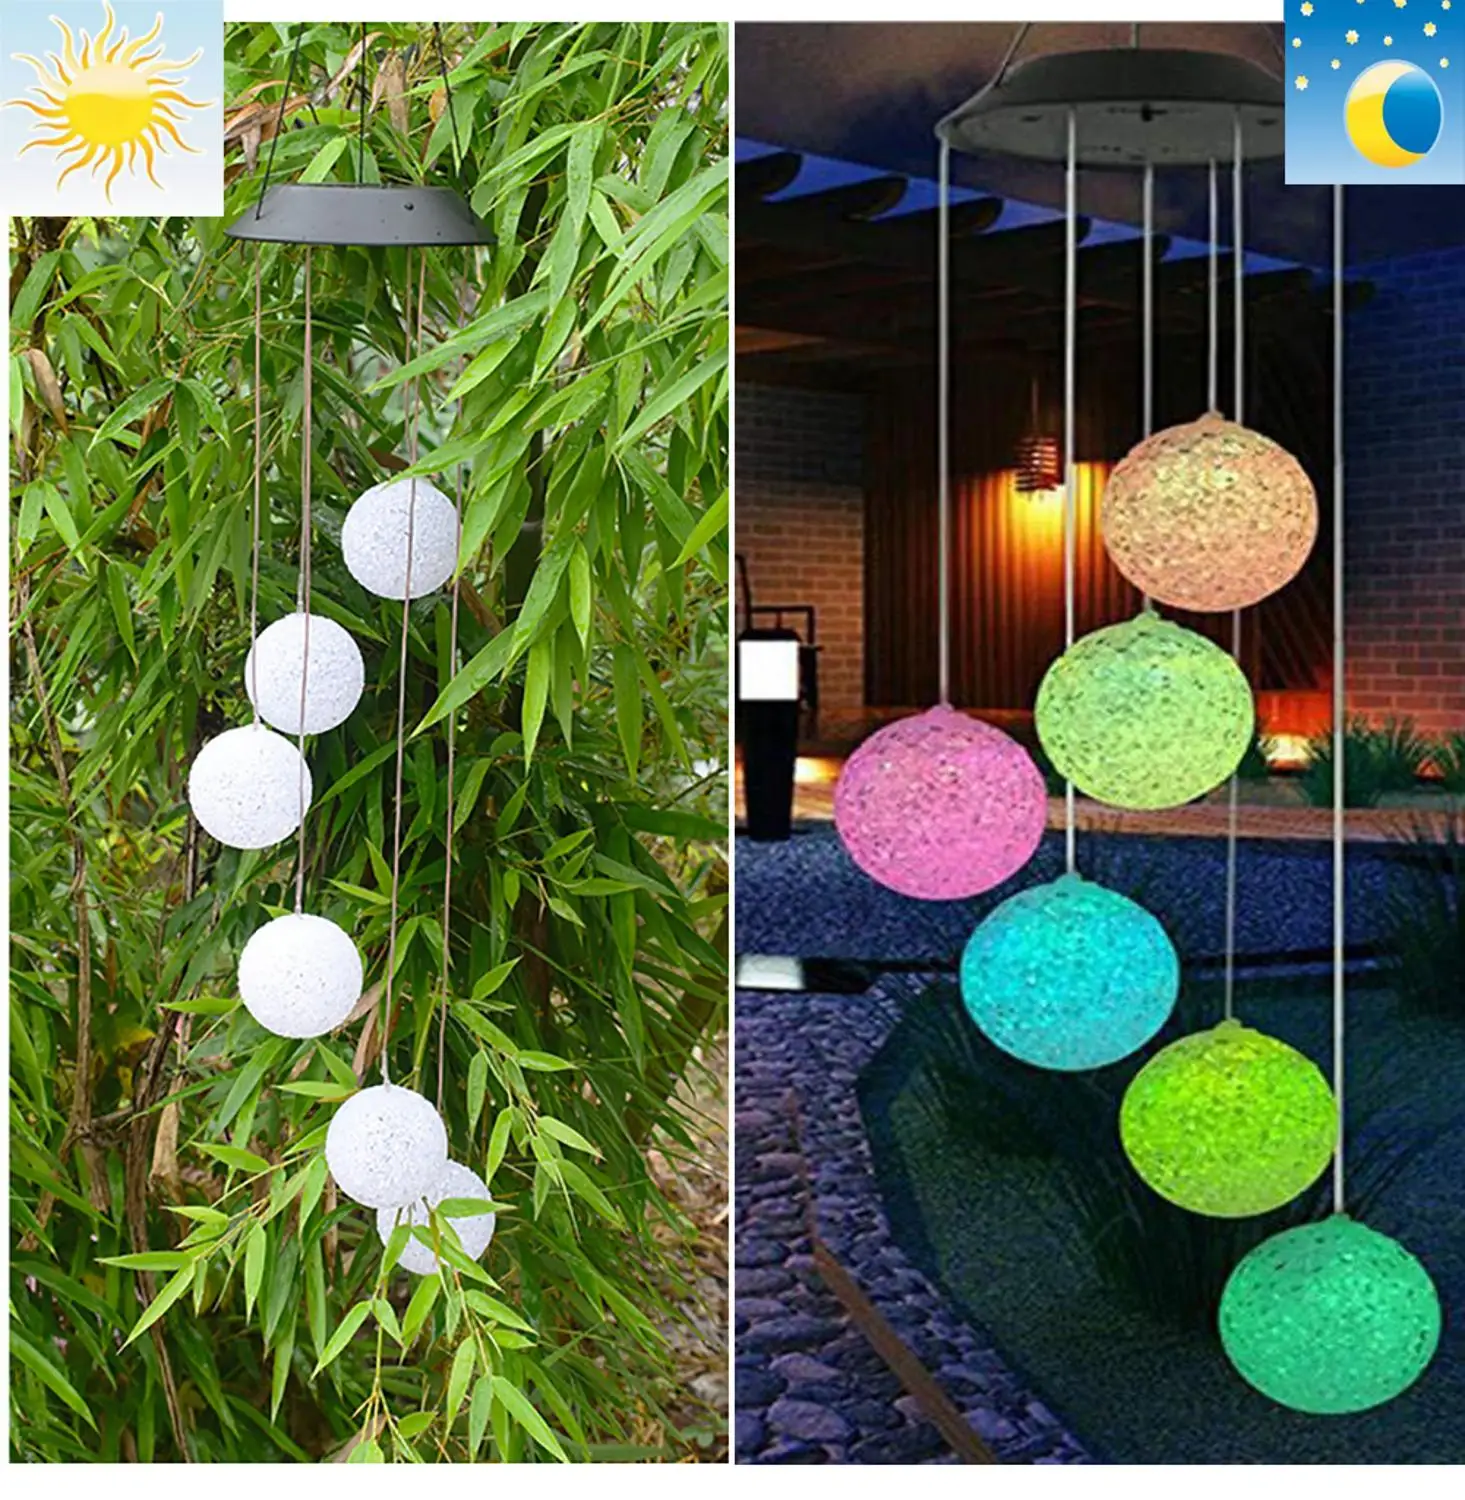 

Wind Chimes Outdoor with Color Changing LED Patio Crystal Moon Lights Romantic Décor Garden Yard Home Gifts for Mom Wife Grandma